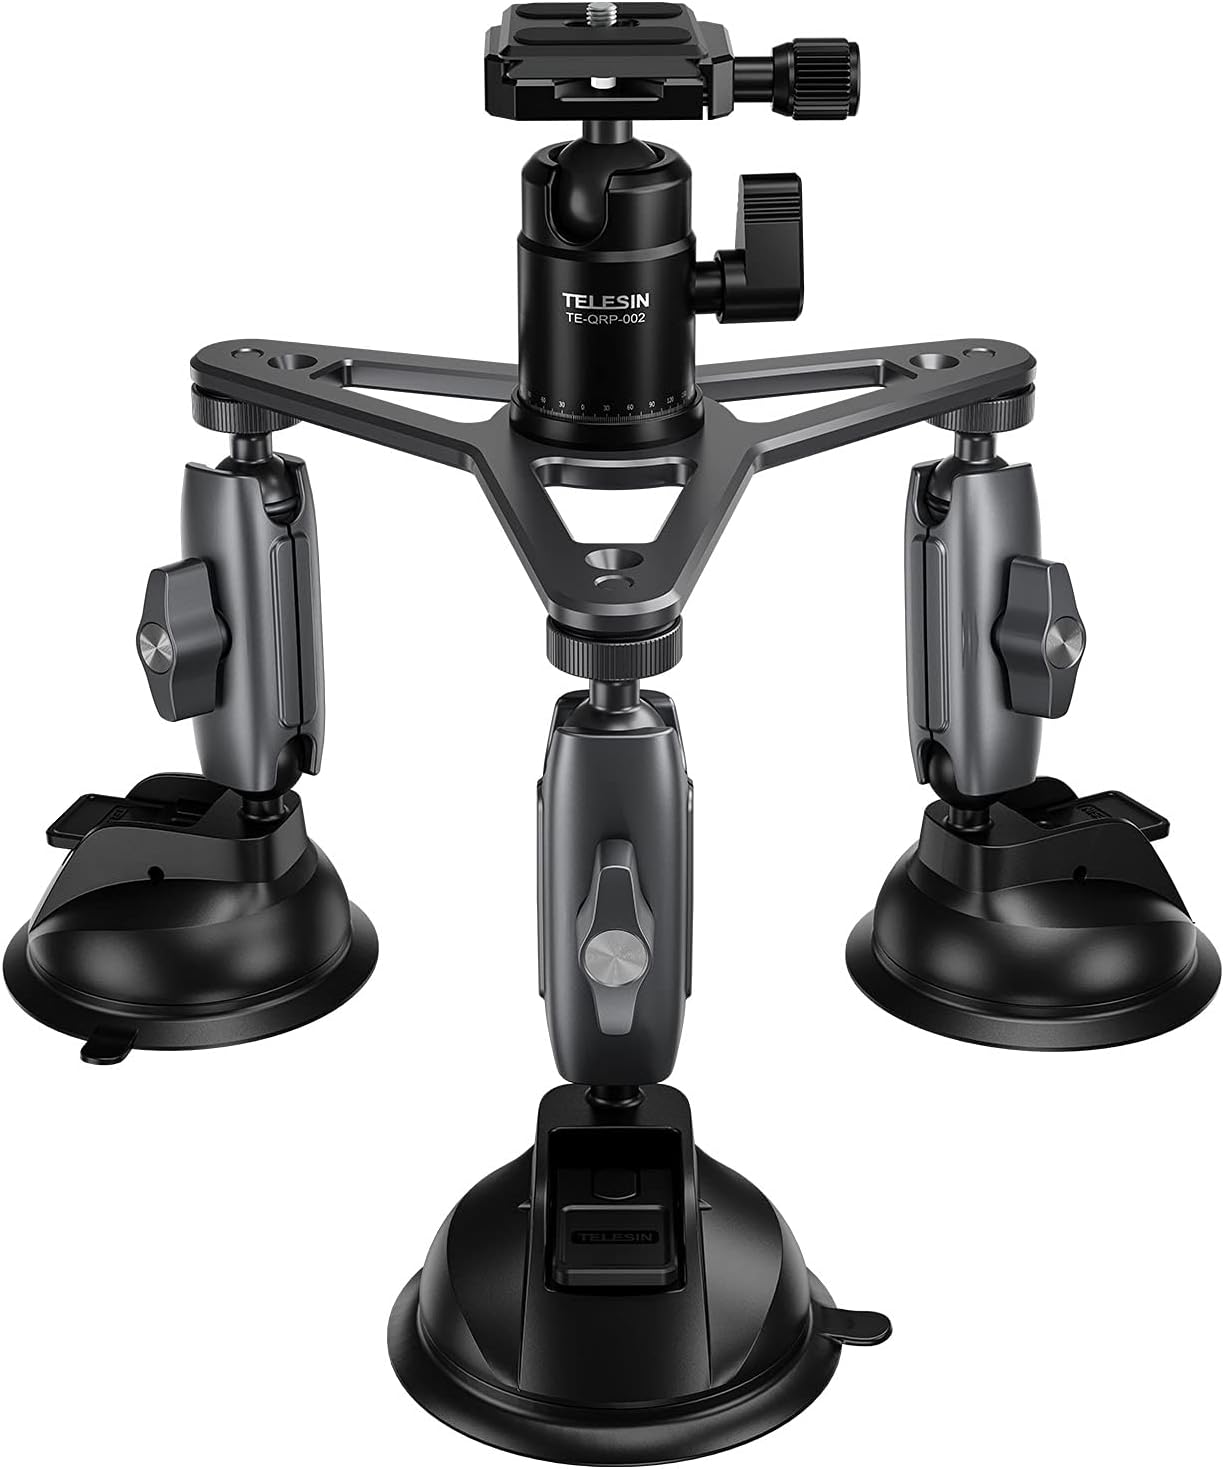 Tripod Triple Suction Cup Mount with 360 Ball Head